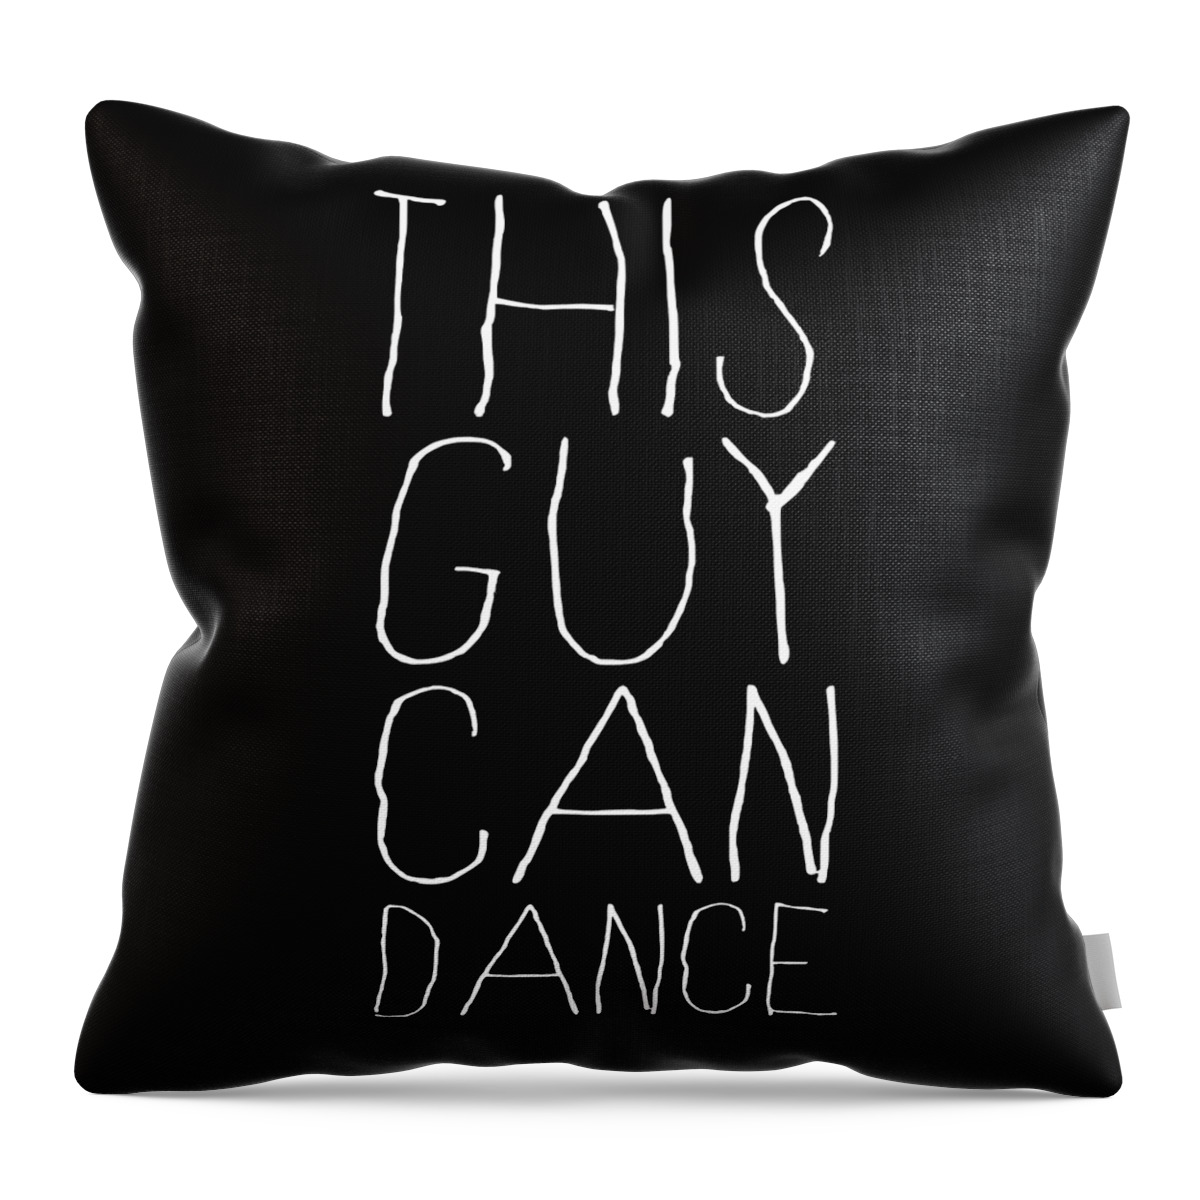 Funny Throw Pillow featuring the digital art This Guy Can Dance by Flippin Sweet Gear